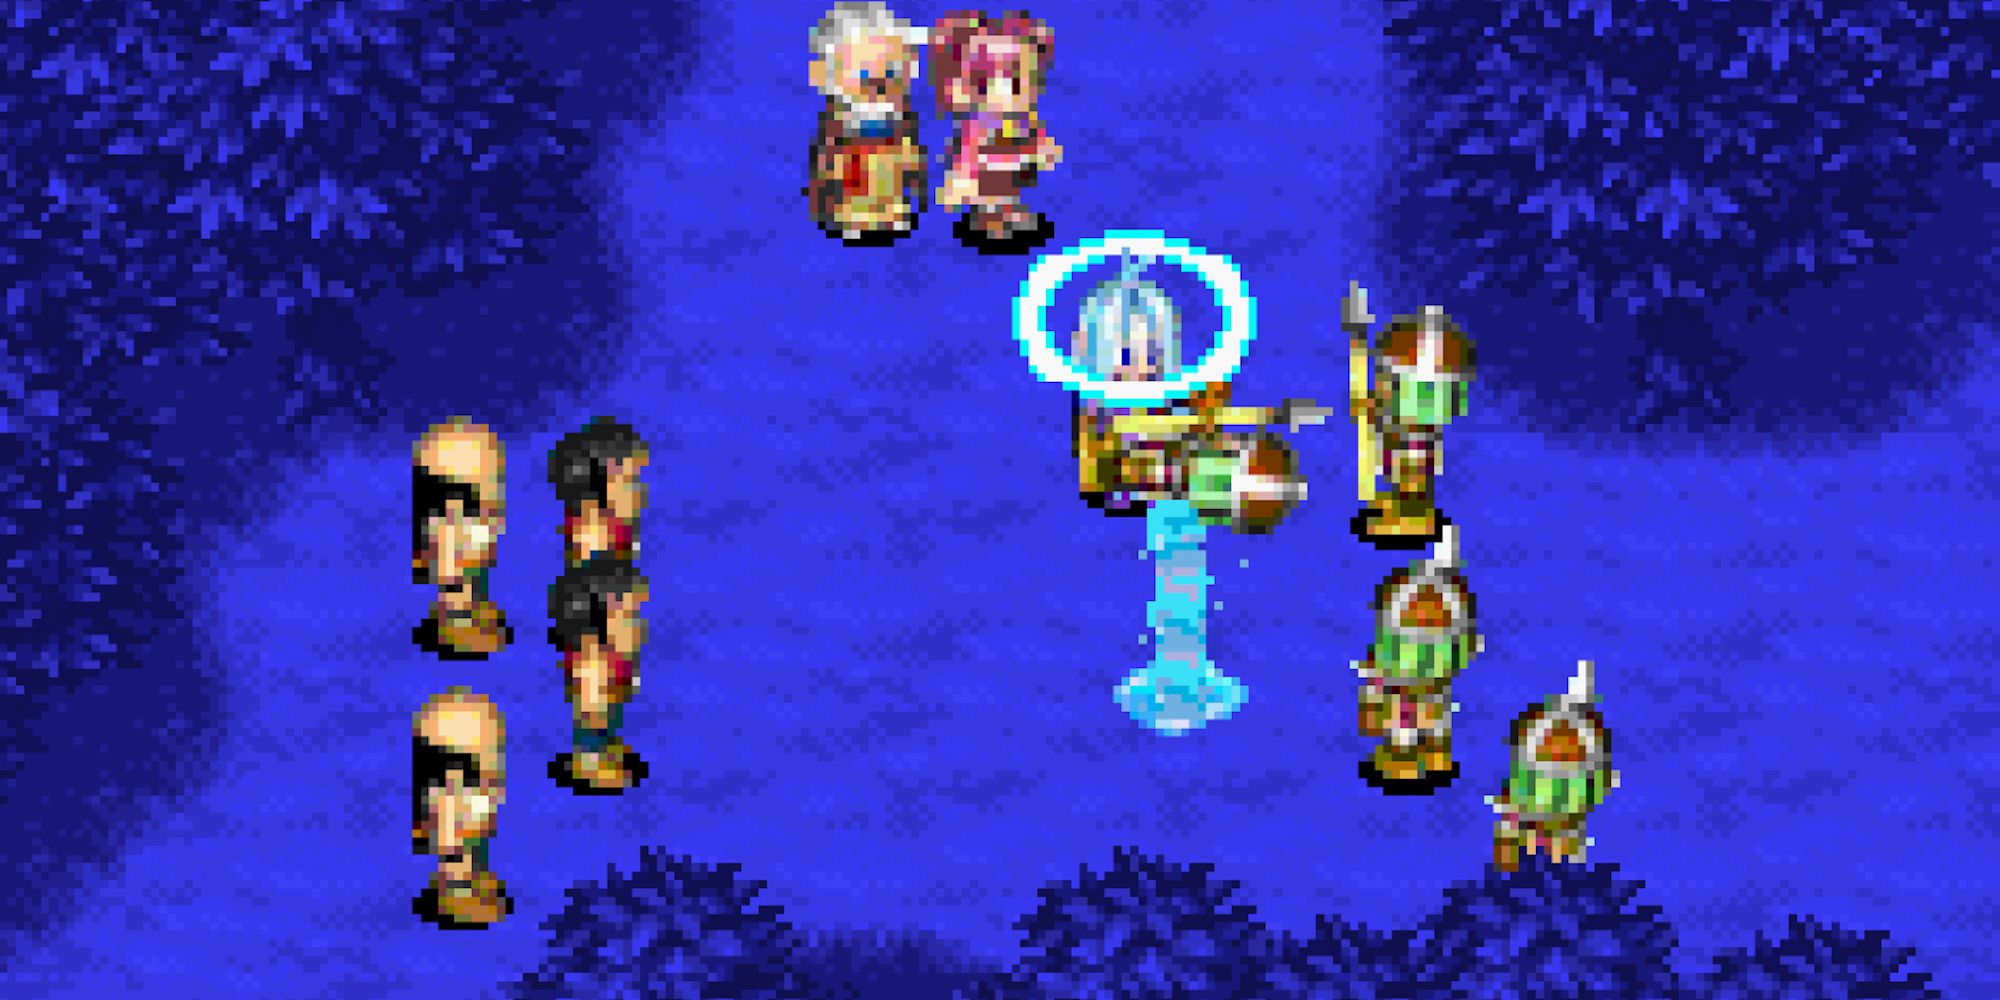 A cutscene featuring characters in Golden Sun The Lost Age